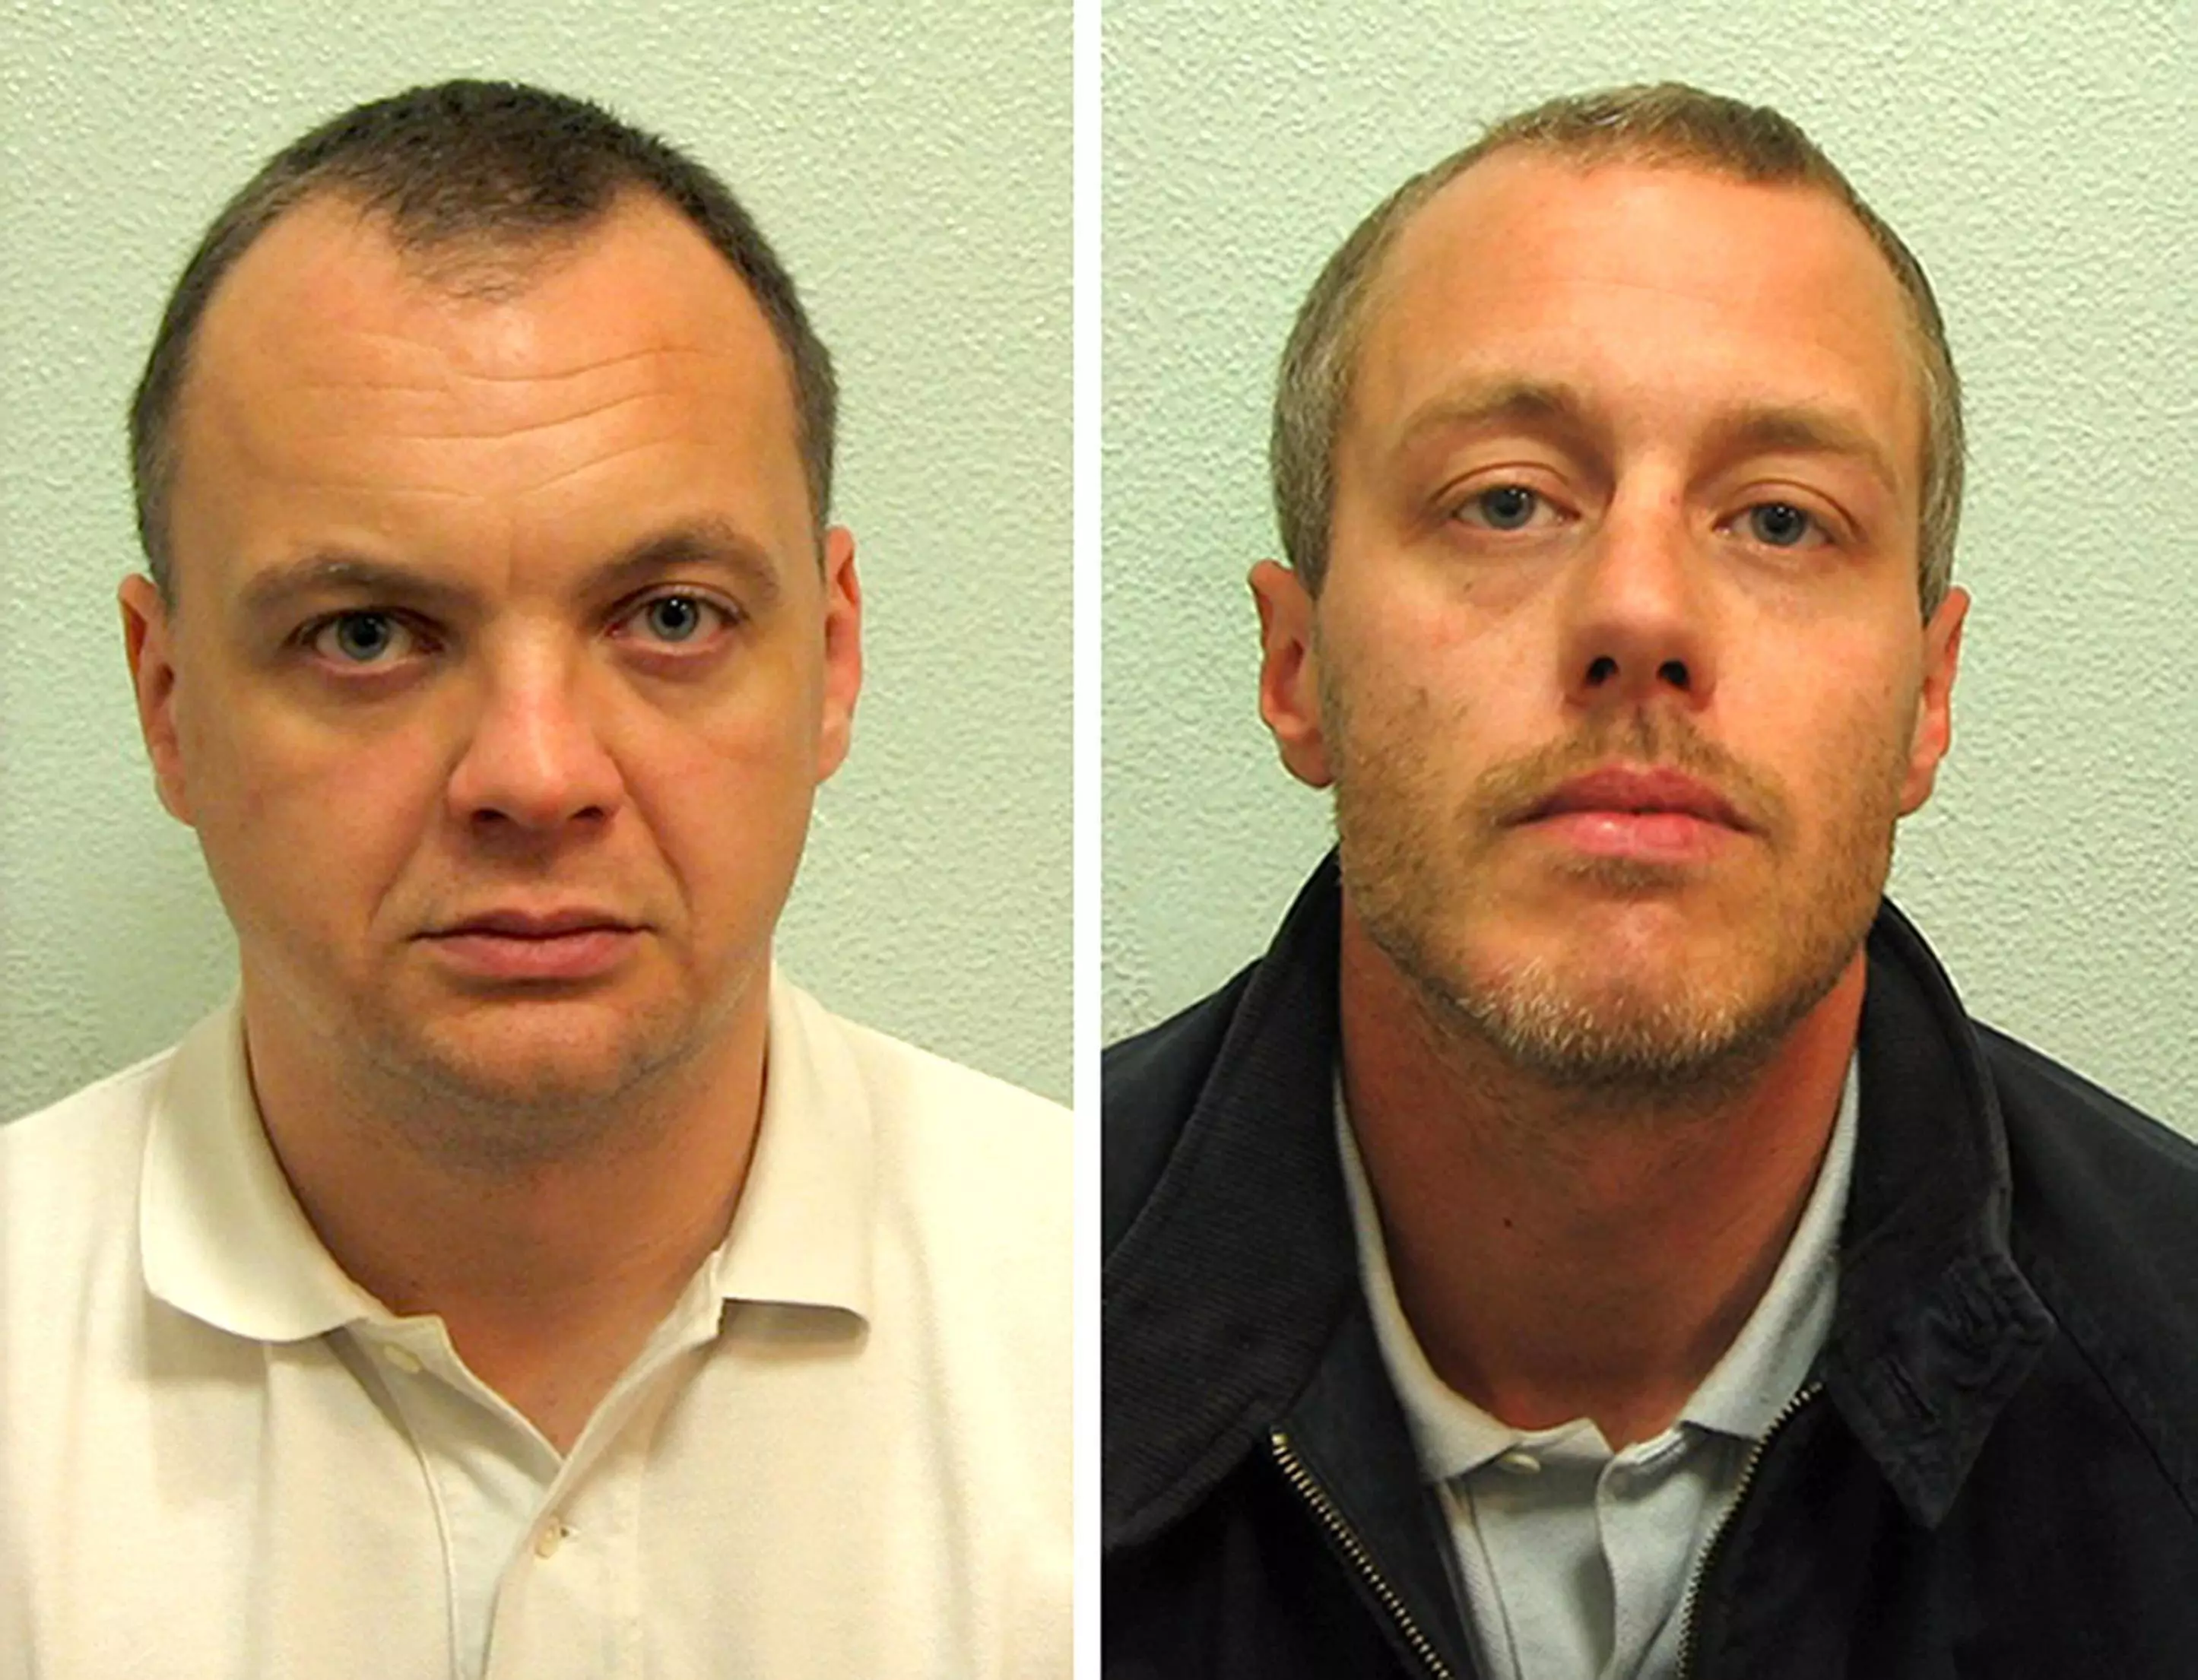 Gary Dobson and David Norris were found guilty in 2012 (